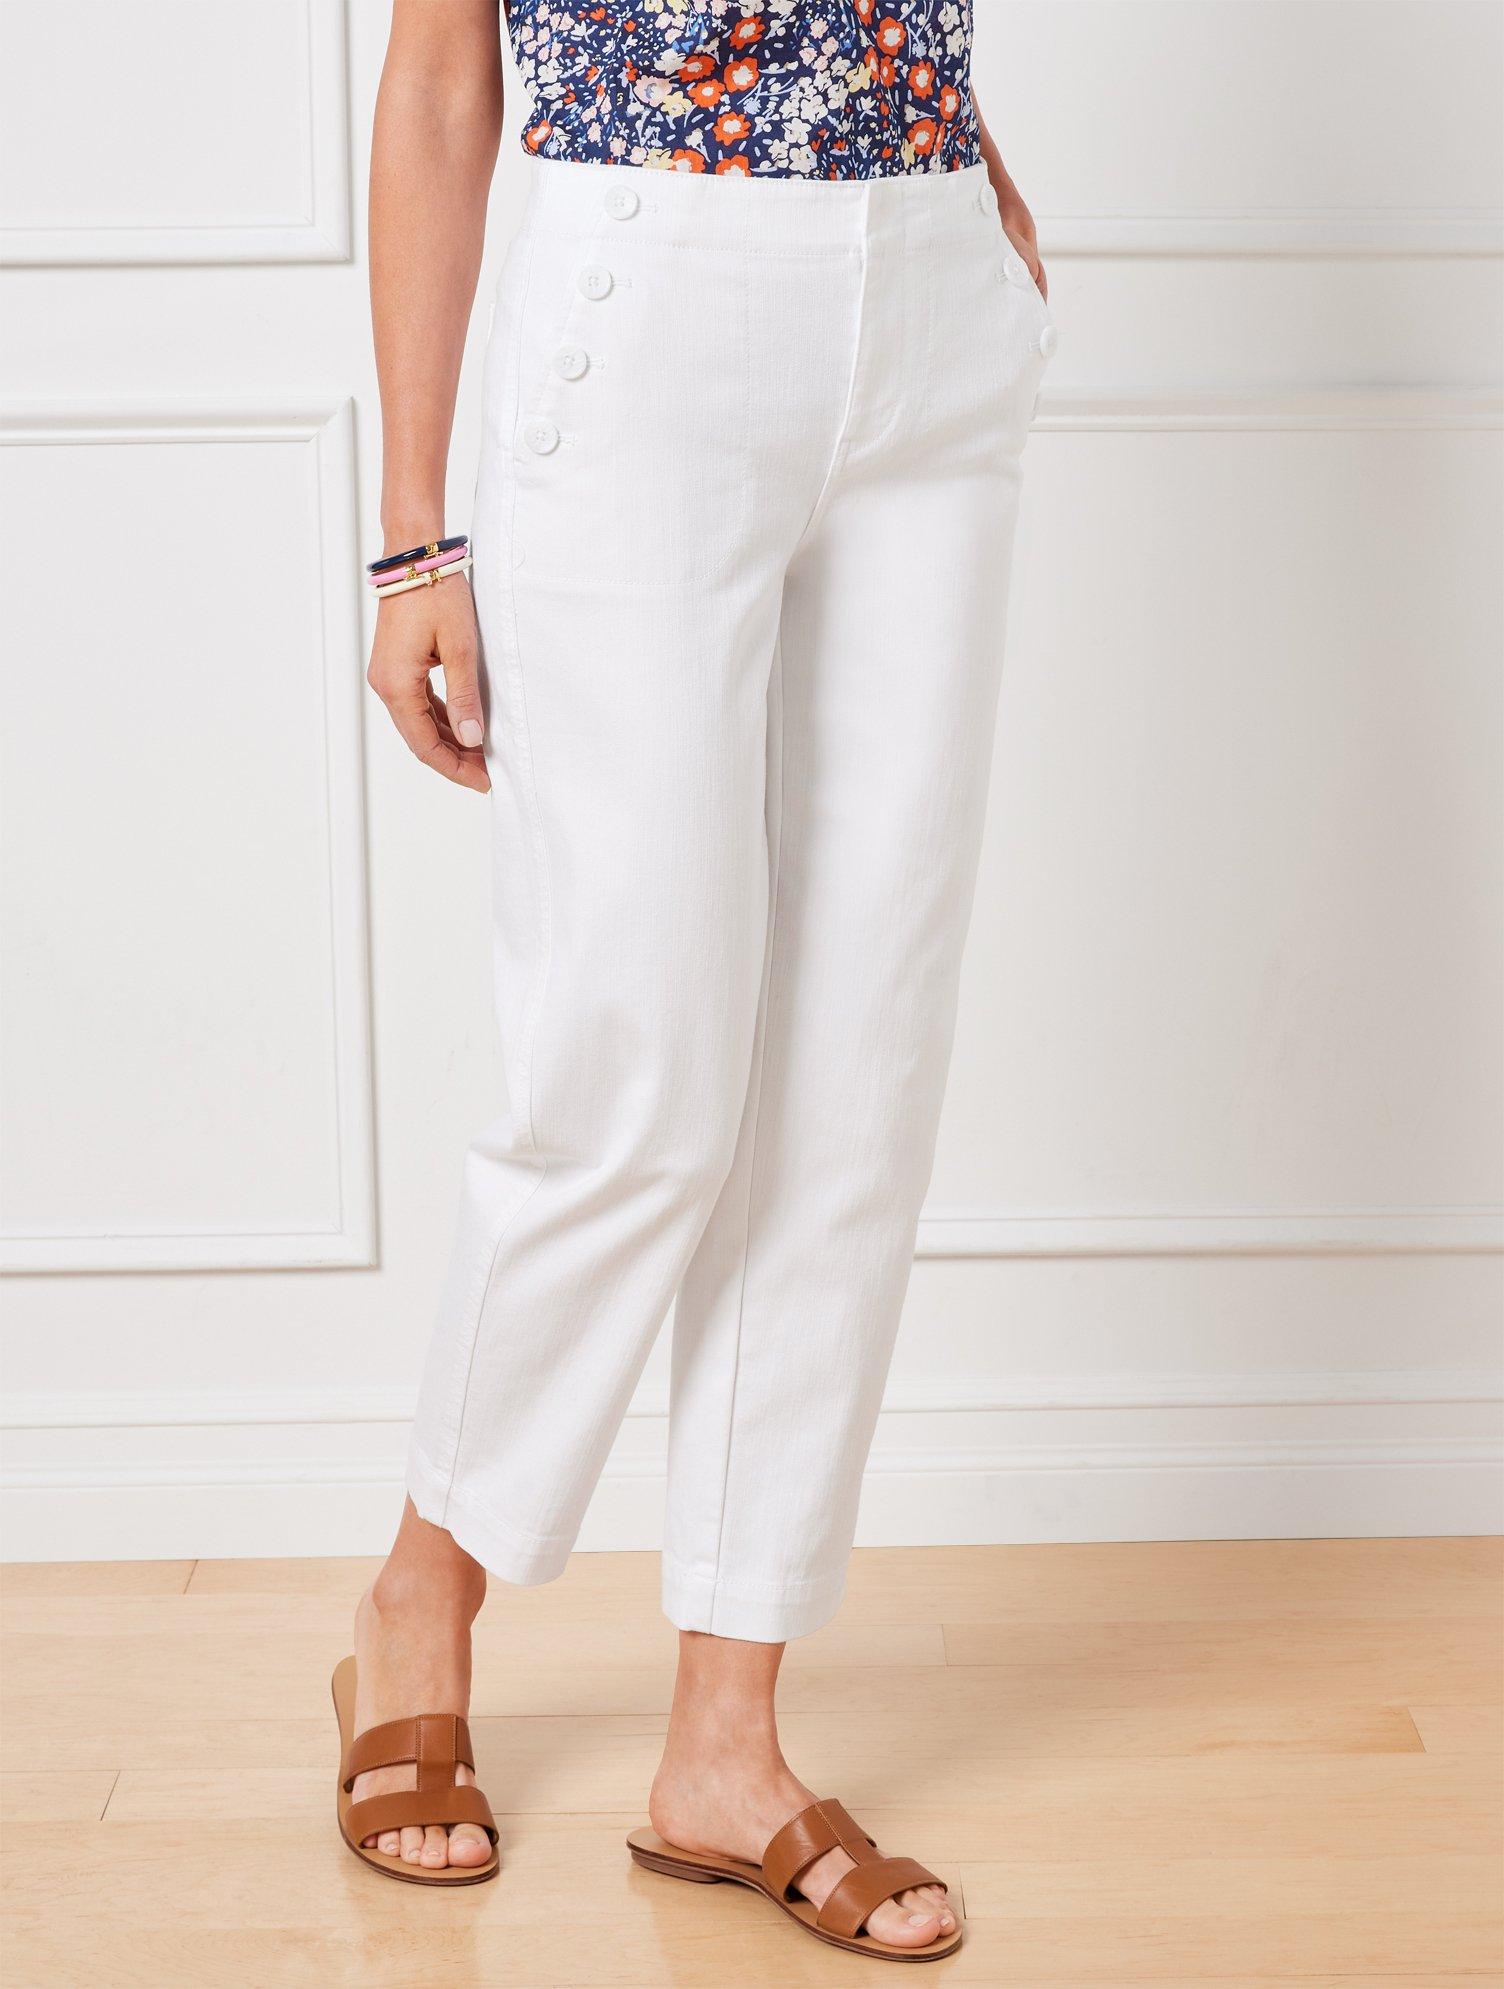 Talbots Sailor Jeans in White